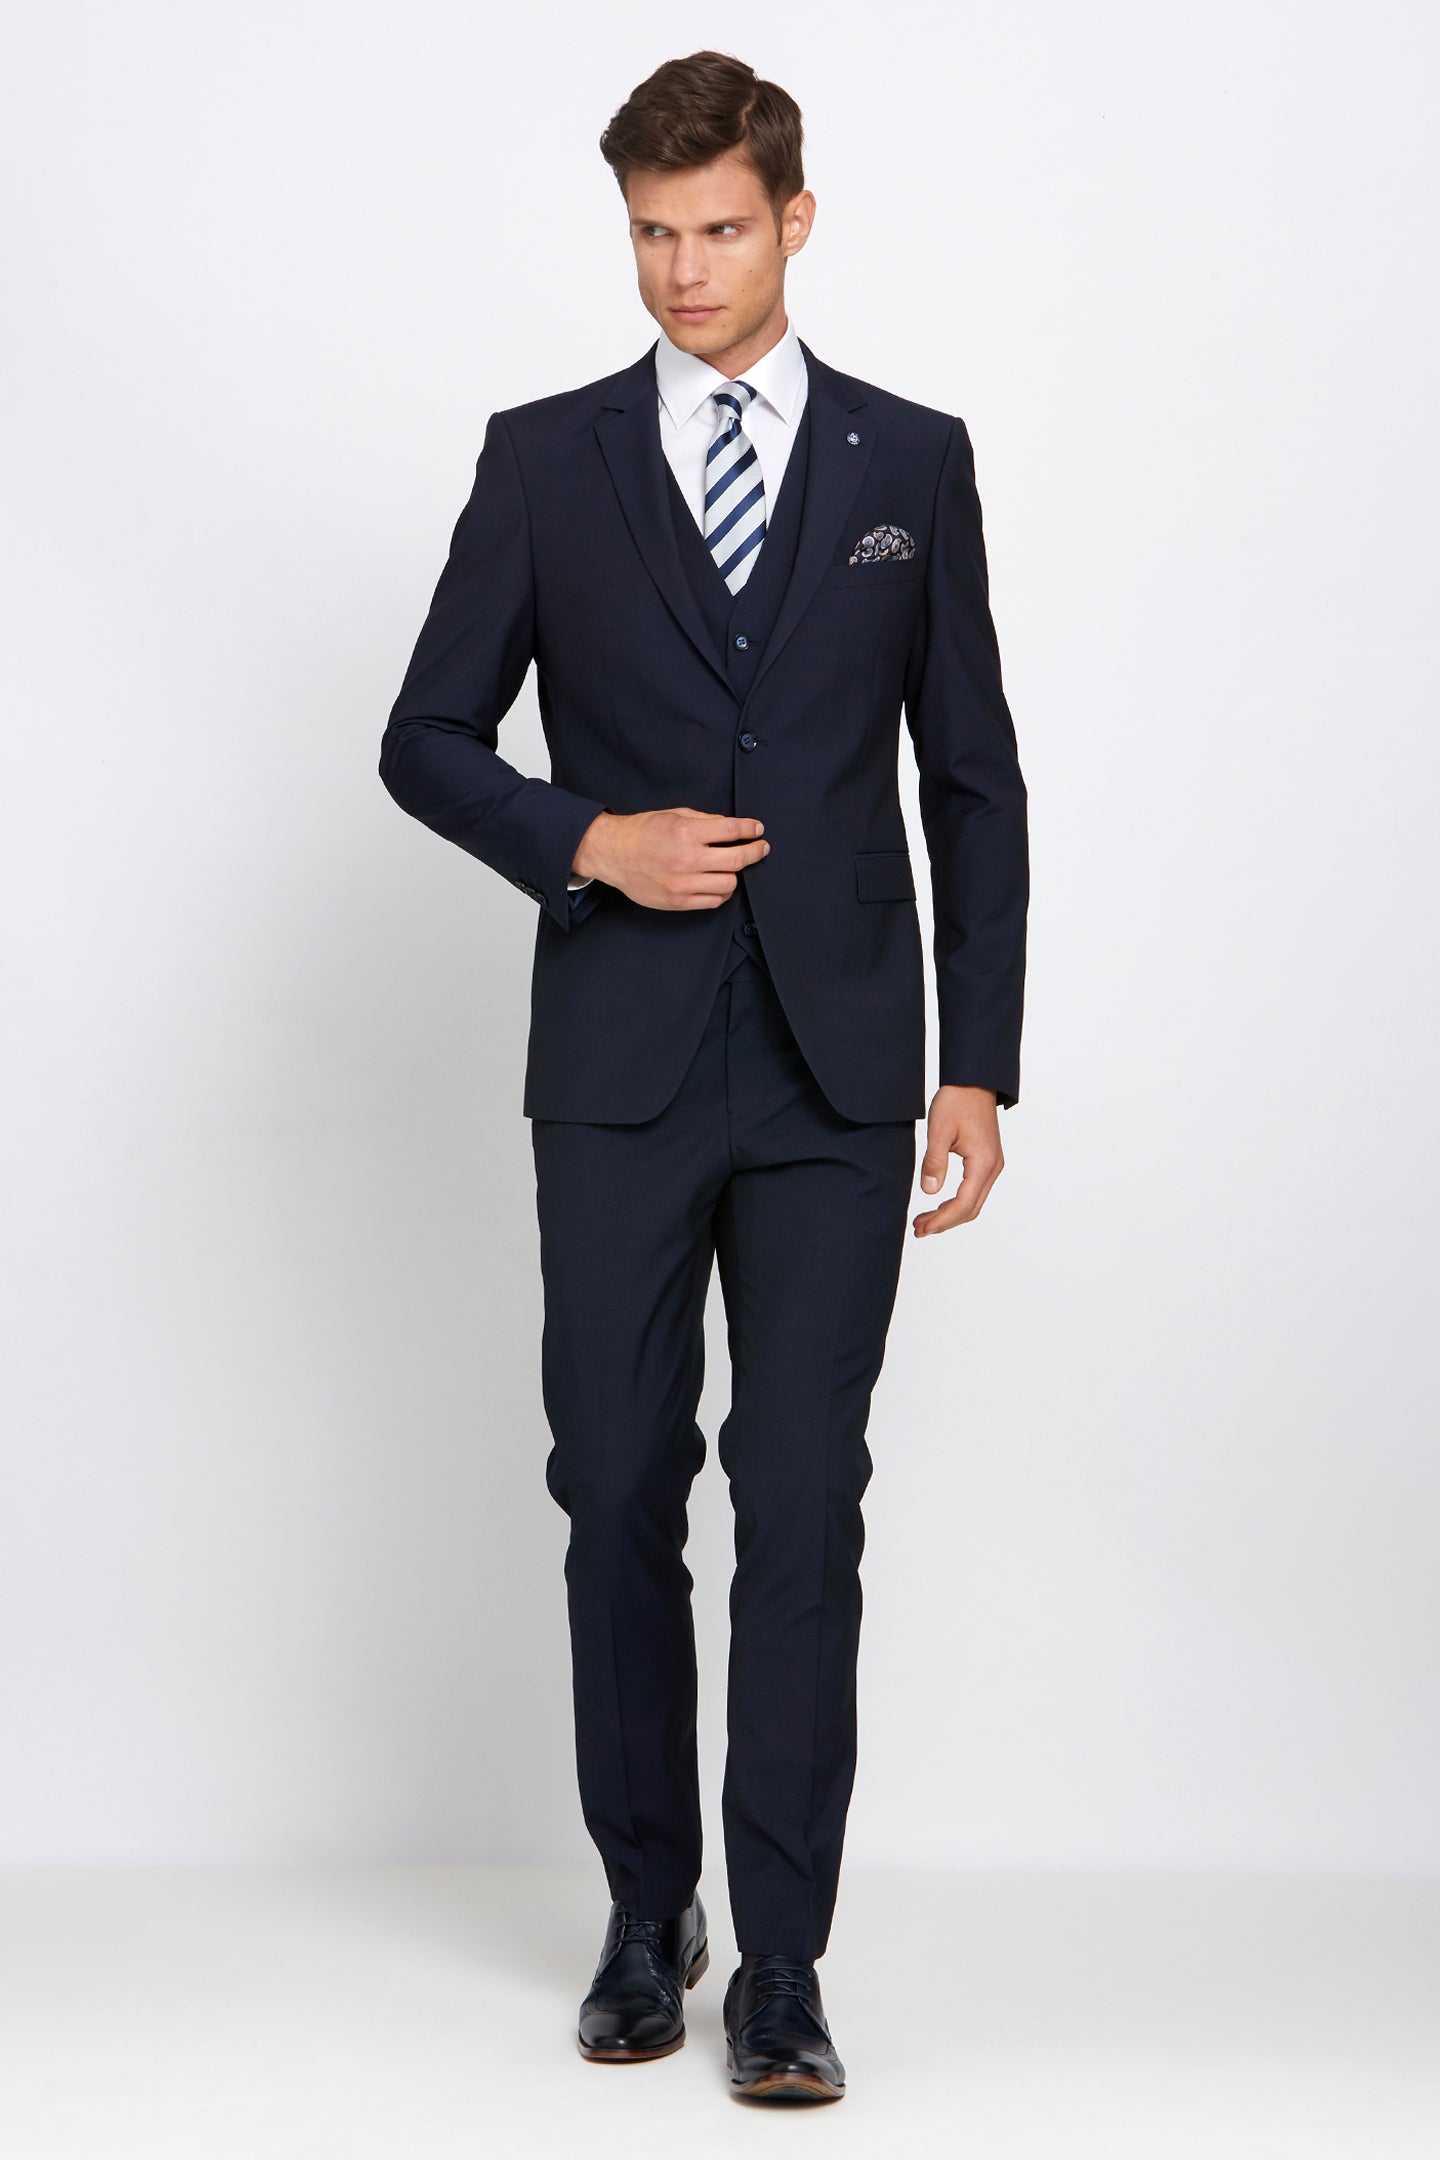 Benetti Cusack Navy Tapered Trousers - Spirit Clothing